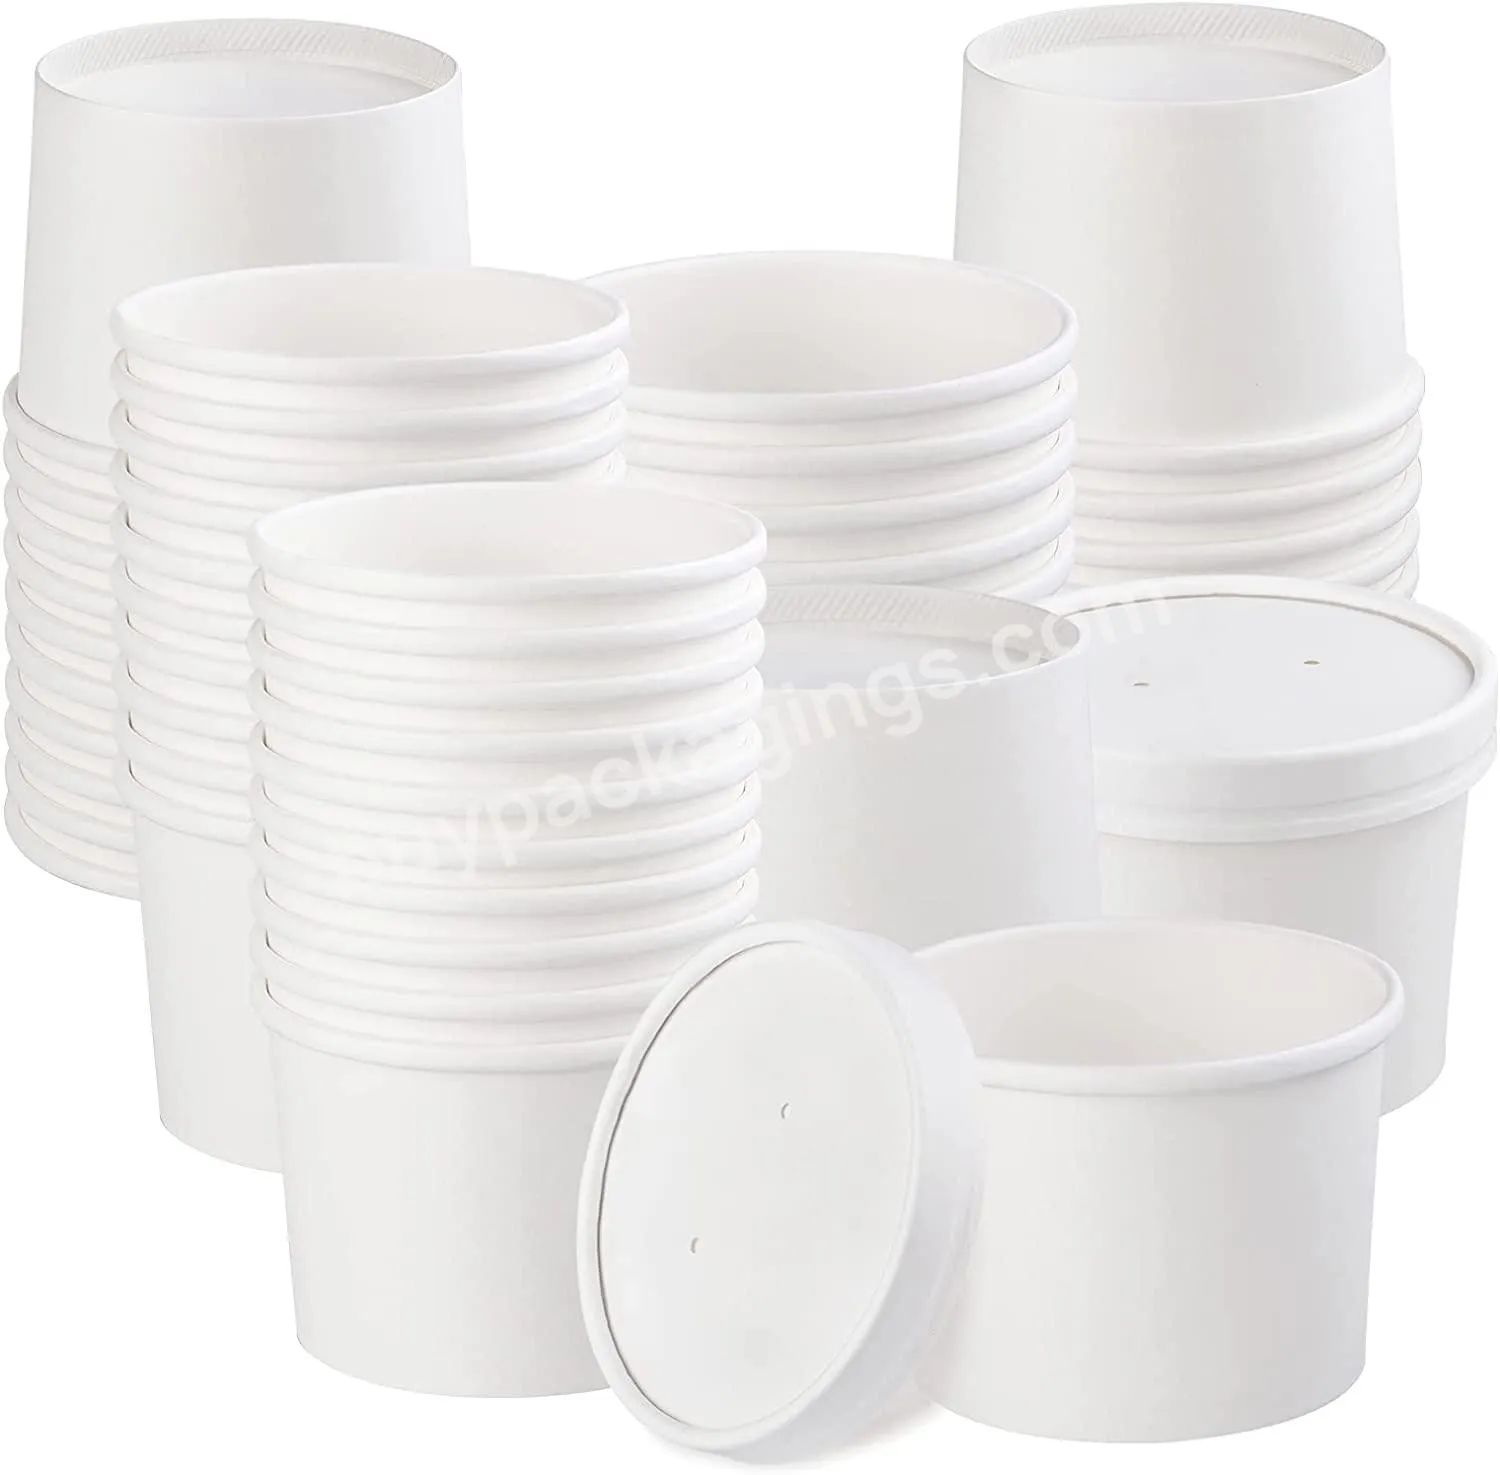 Best Selling Biodegradable Disposable Paper Soup Bowl Good Quality Paper Soup Cup - Buy Biodegradeable Soup Bowl Wheat,Biodegradeqble Paper Soup Bowl,Bioking Disposable Soup Bowl.